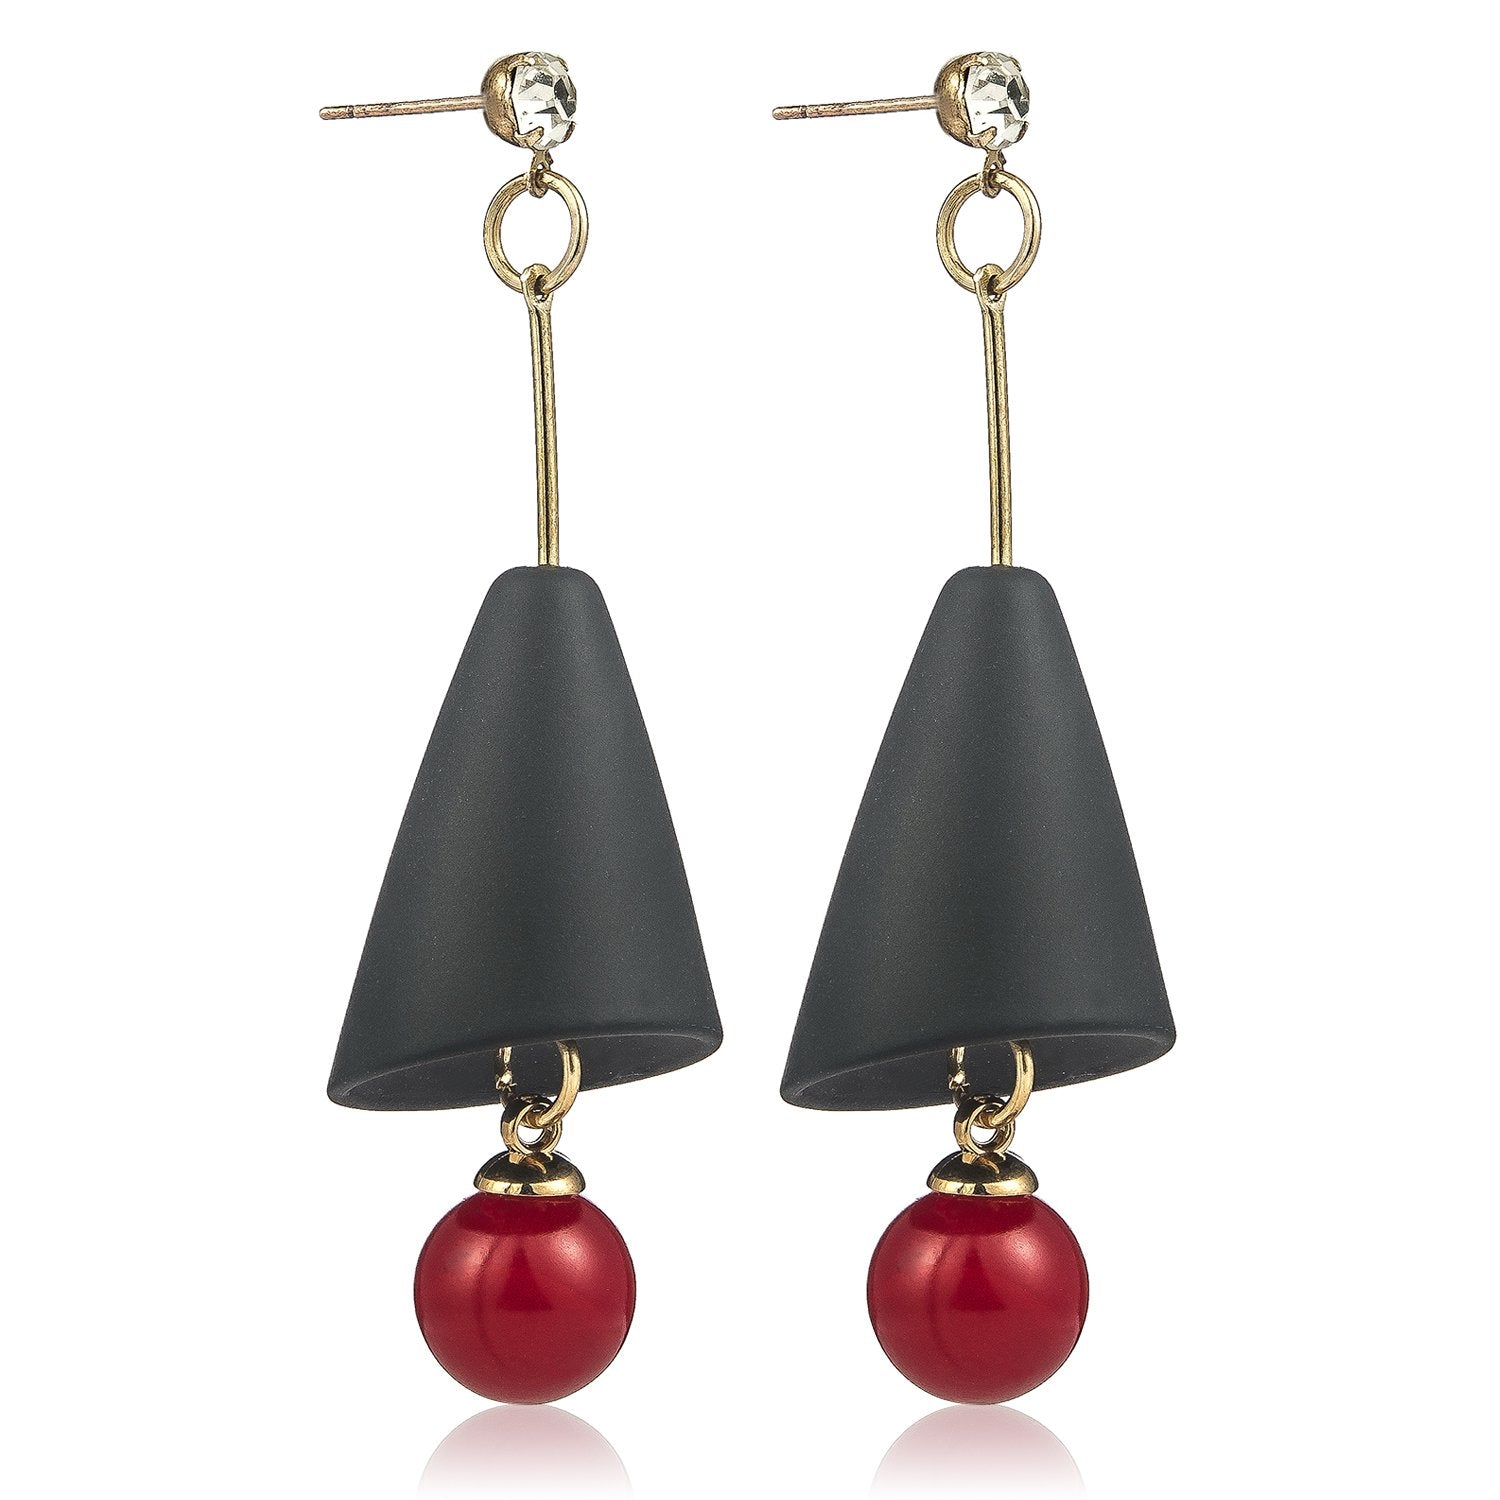 Yellow Chimes Moxie Collection Black Bell Designer Earrings for Women and Girls